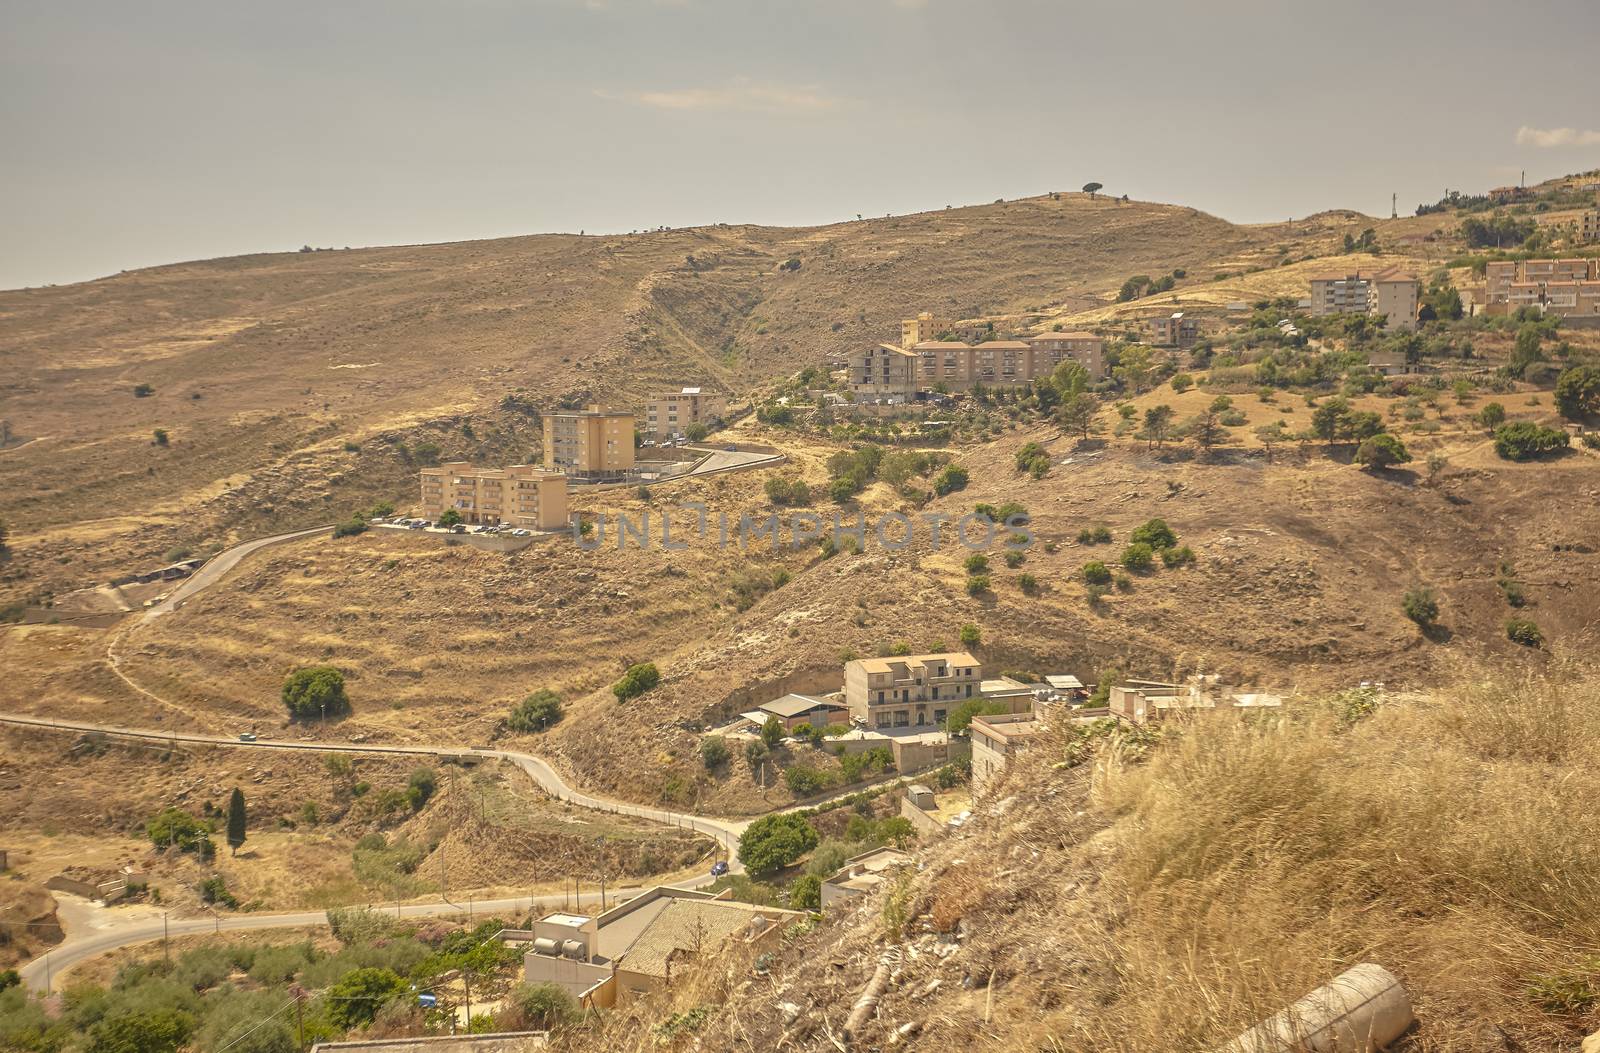 Panorama of the Sicilian hills and the town of Butera in the southern part of Sicily